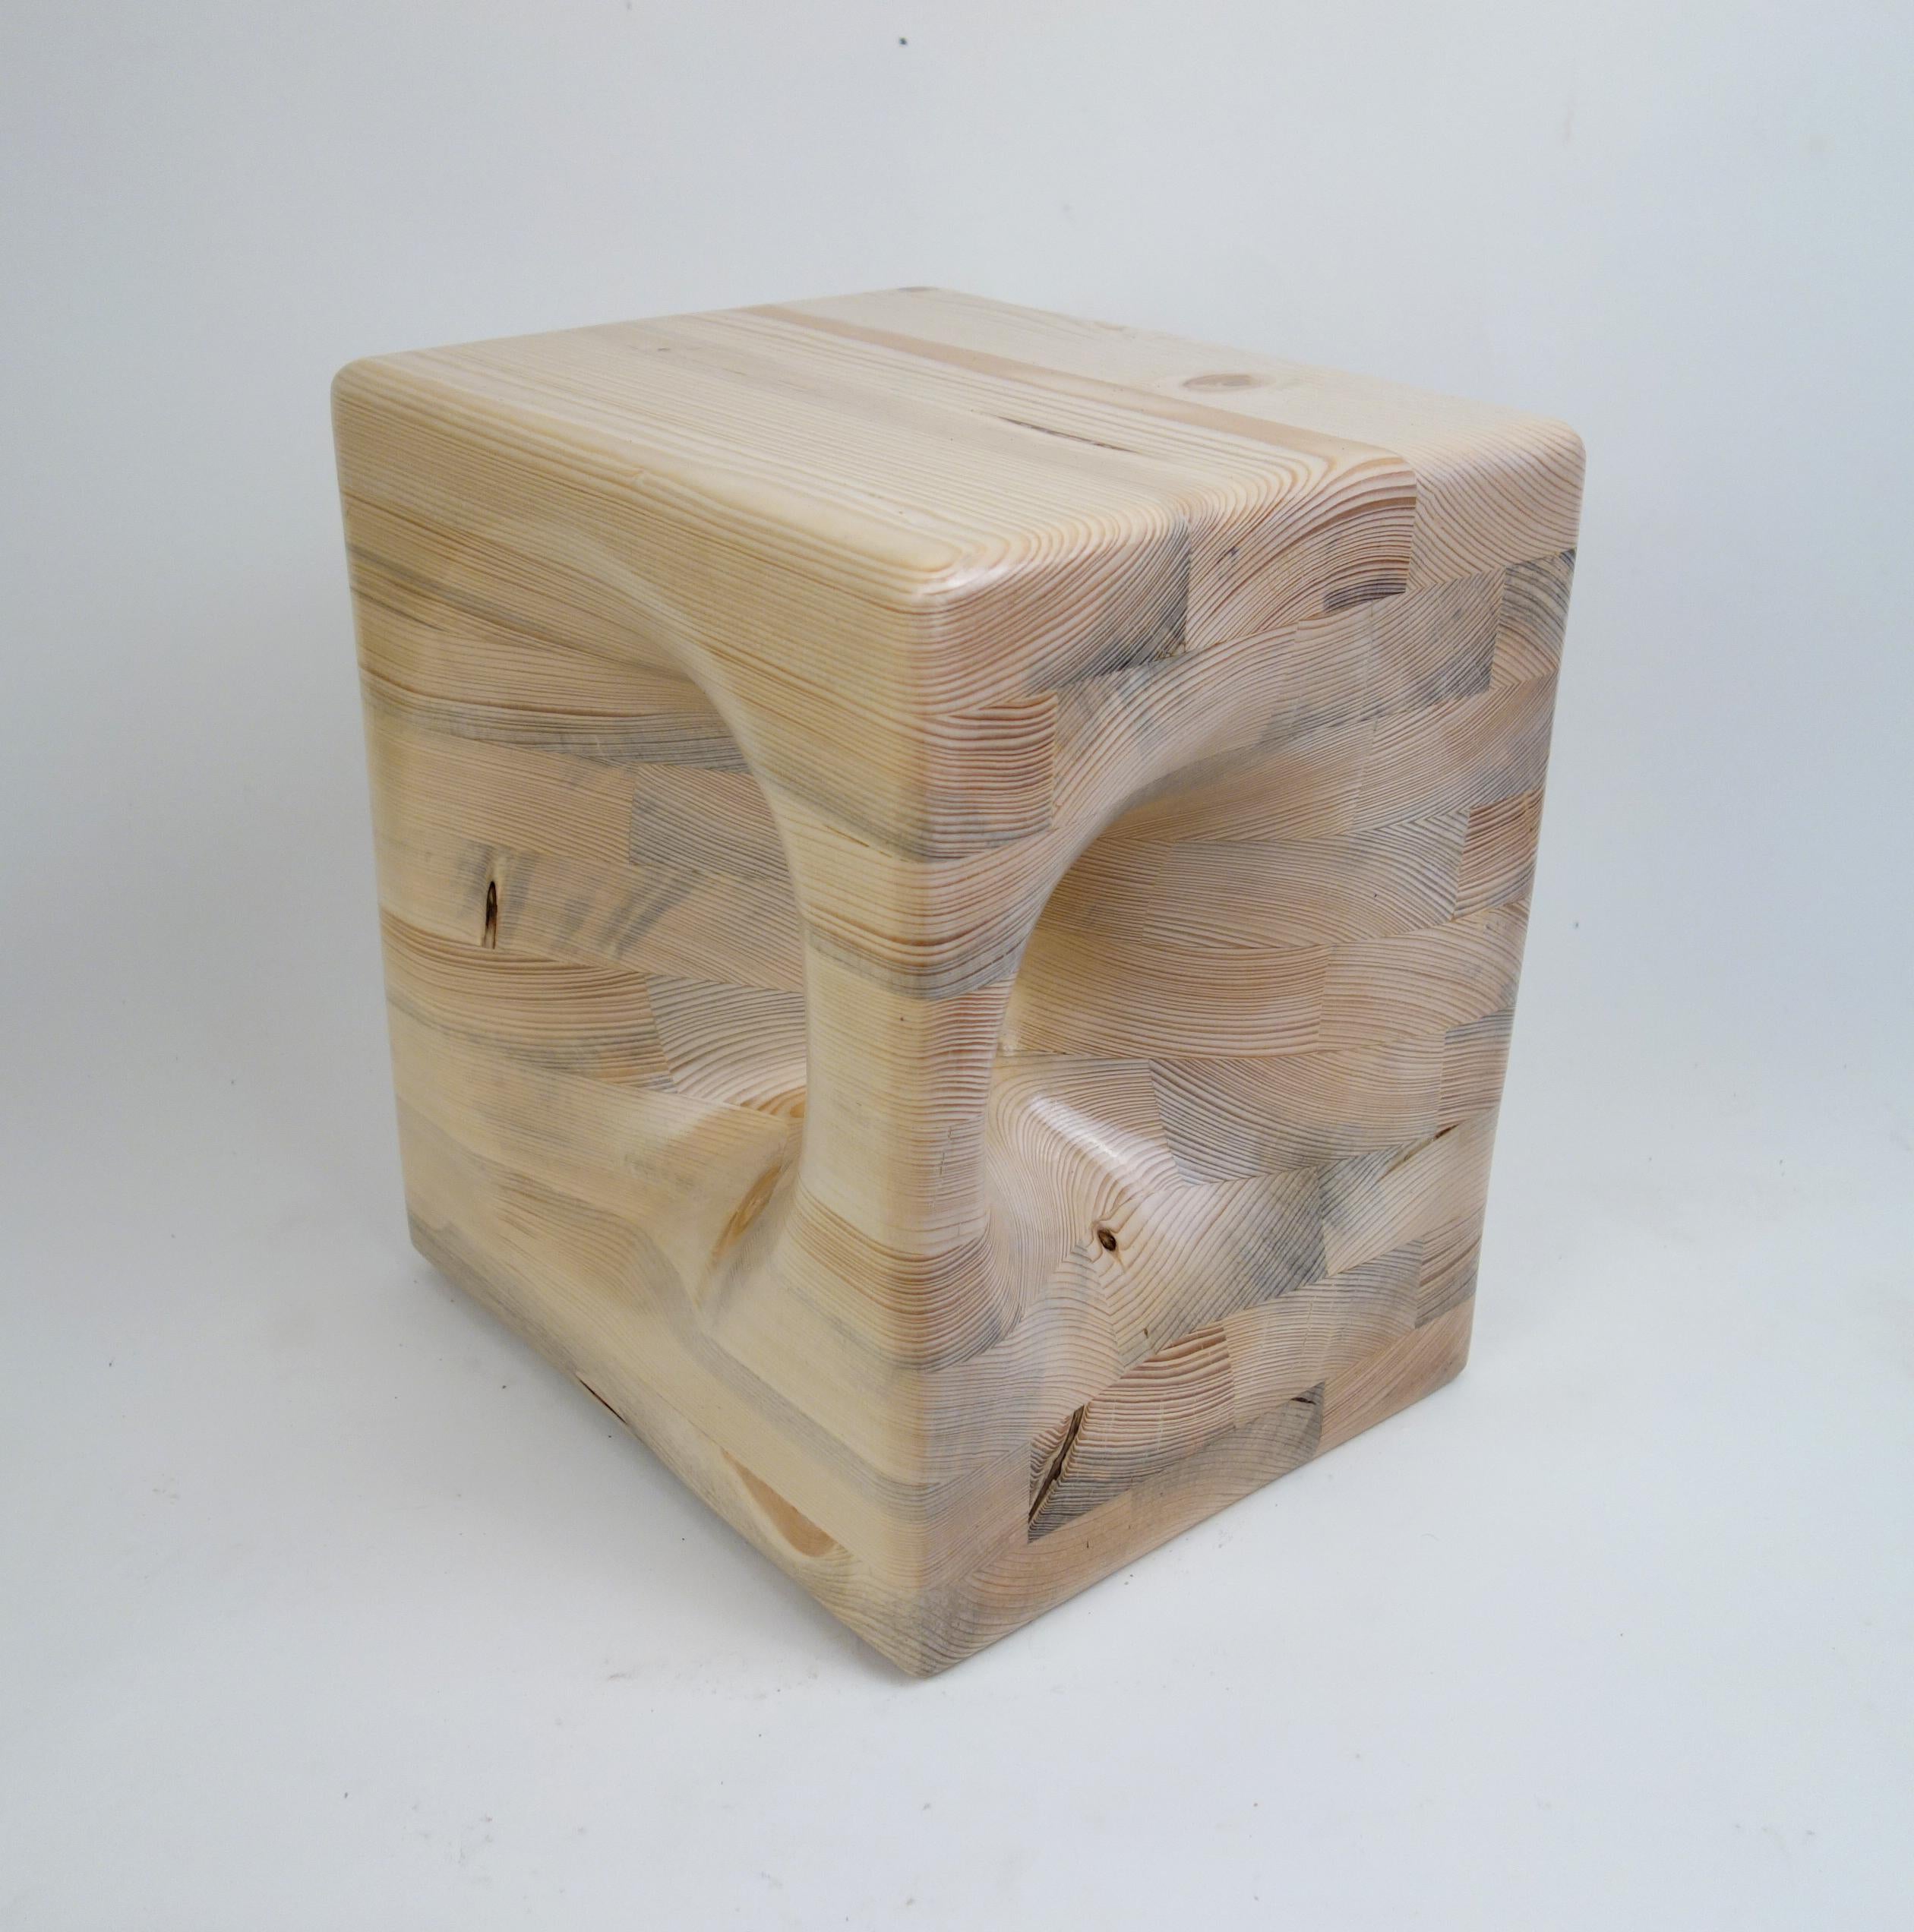 Loch stool table by Aaron Scott
Dimensions: D 25.5 x W 30.5 x H 33.5 cm
Materials: western white pine.
Also available in other woods: bleached cherry, walnut. 


Brooklyn-based designer Aaron Scott was raised in the mountains and forests of